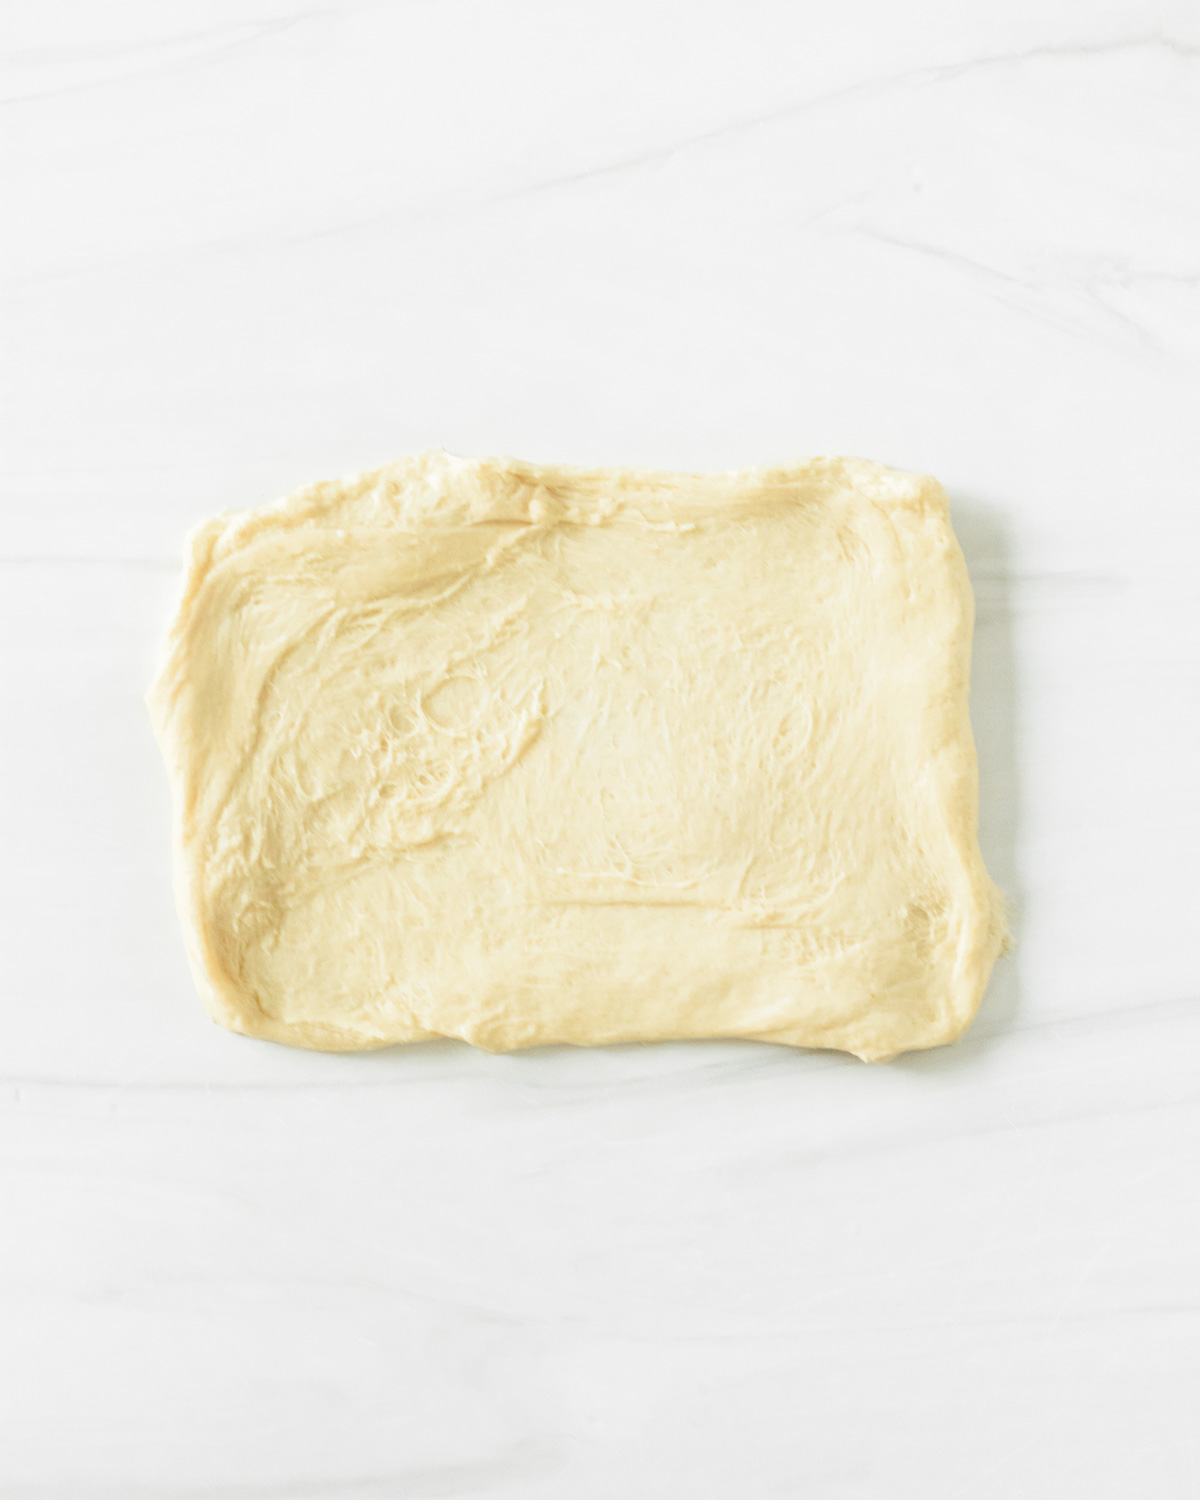 Step 3. Stretch each section of dough into a rectangle